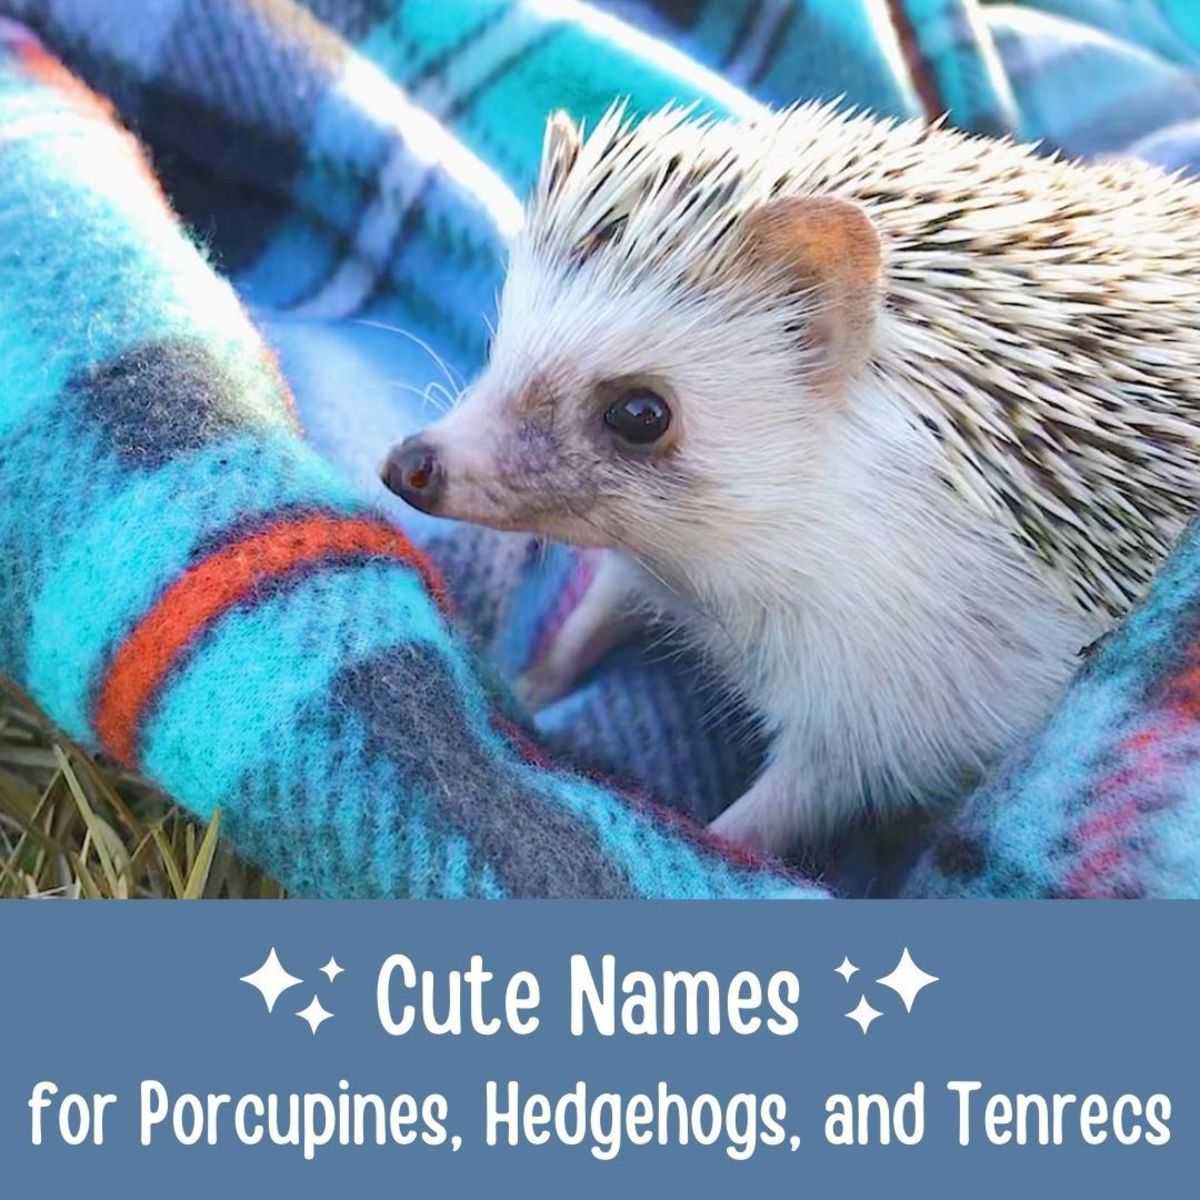 Names for porcupines and hedgehogs.